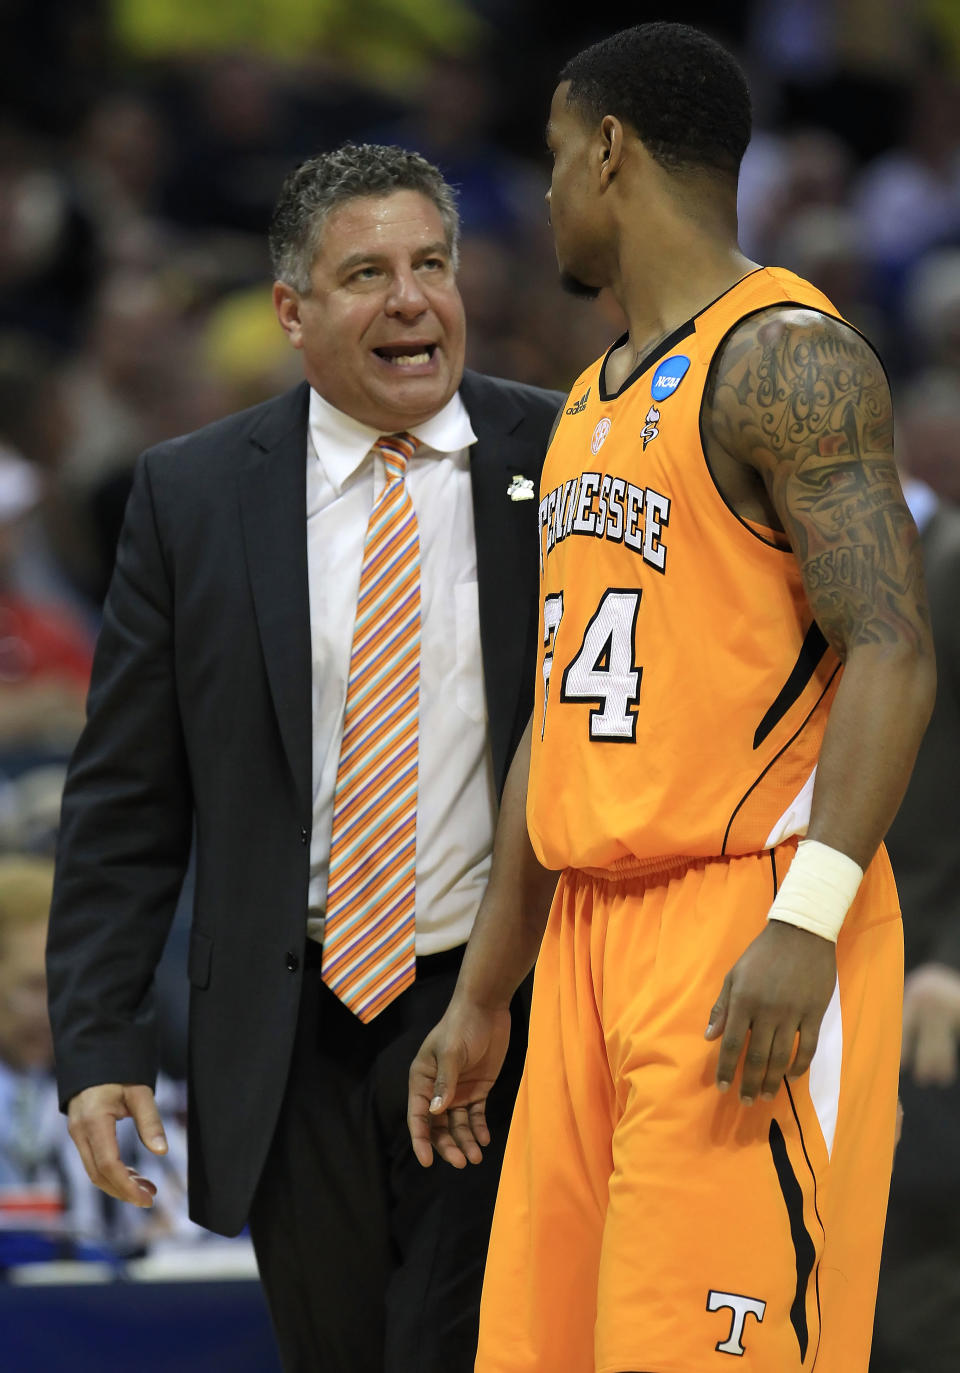 CHARLOTTE, NC - MARCH 18: Head coach Bruce Pearl of the Tennessee Volunteers talks with Josh Bone #24 in the second half while taking on the Michigan Wolverines during the second round of the 2011 NCAA men's basketball tournament at Time Warner Cable Arena on March 18, 2011 in Charlotte, North Carolina. (Photo by Streeter Lecka/Getty Images)